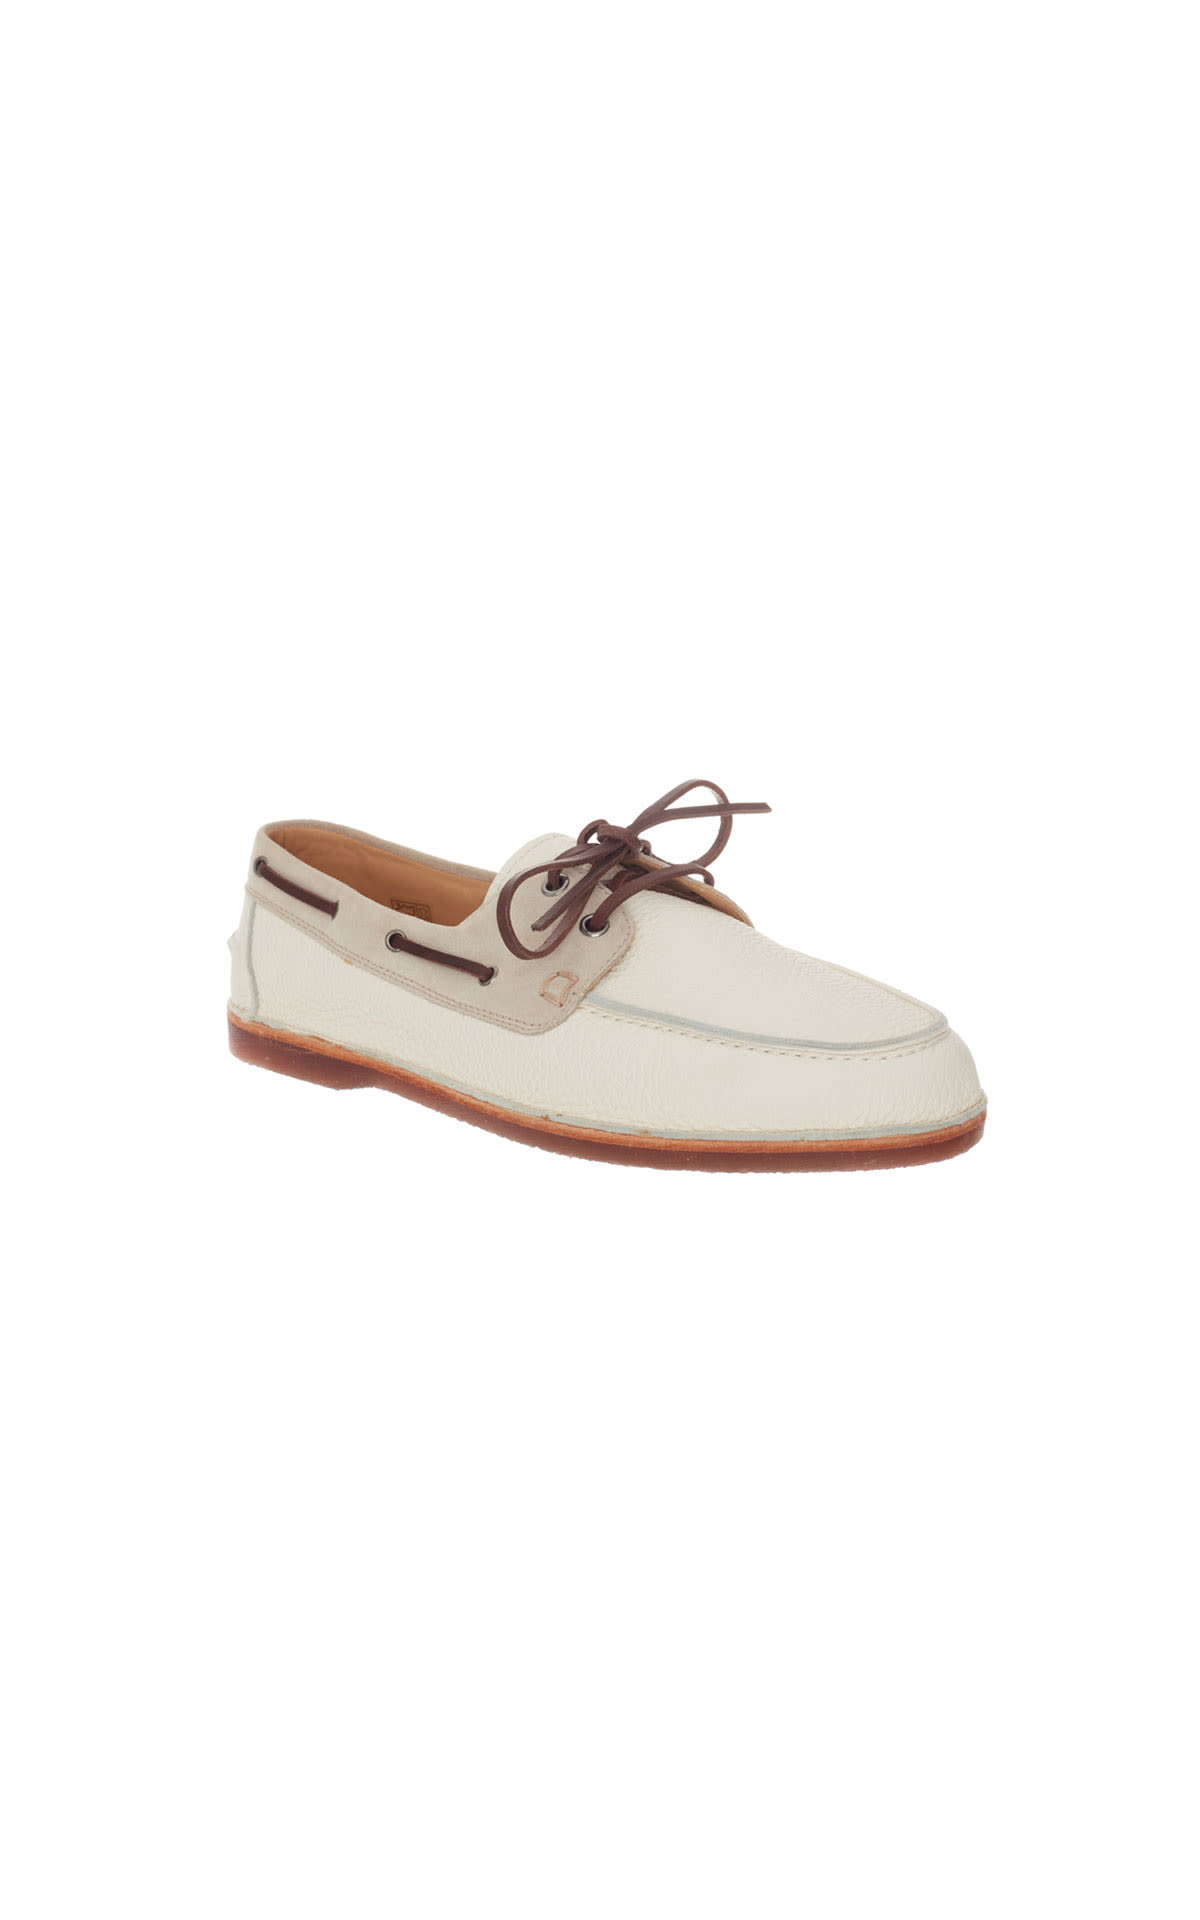 Brunello Cucinelli Leather boat shoe from Bicester Village